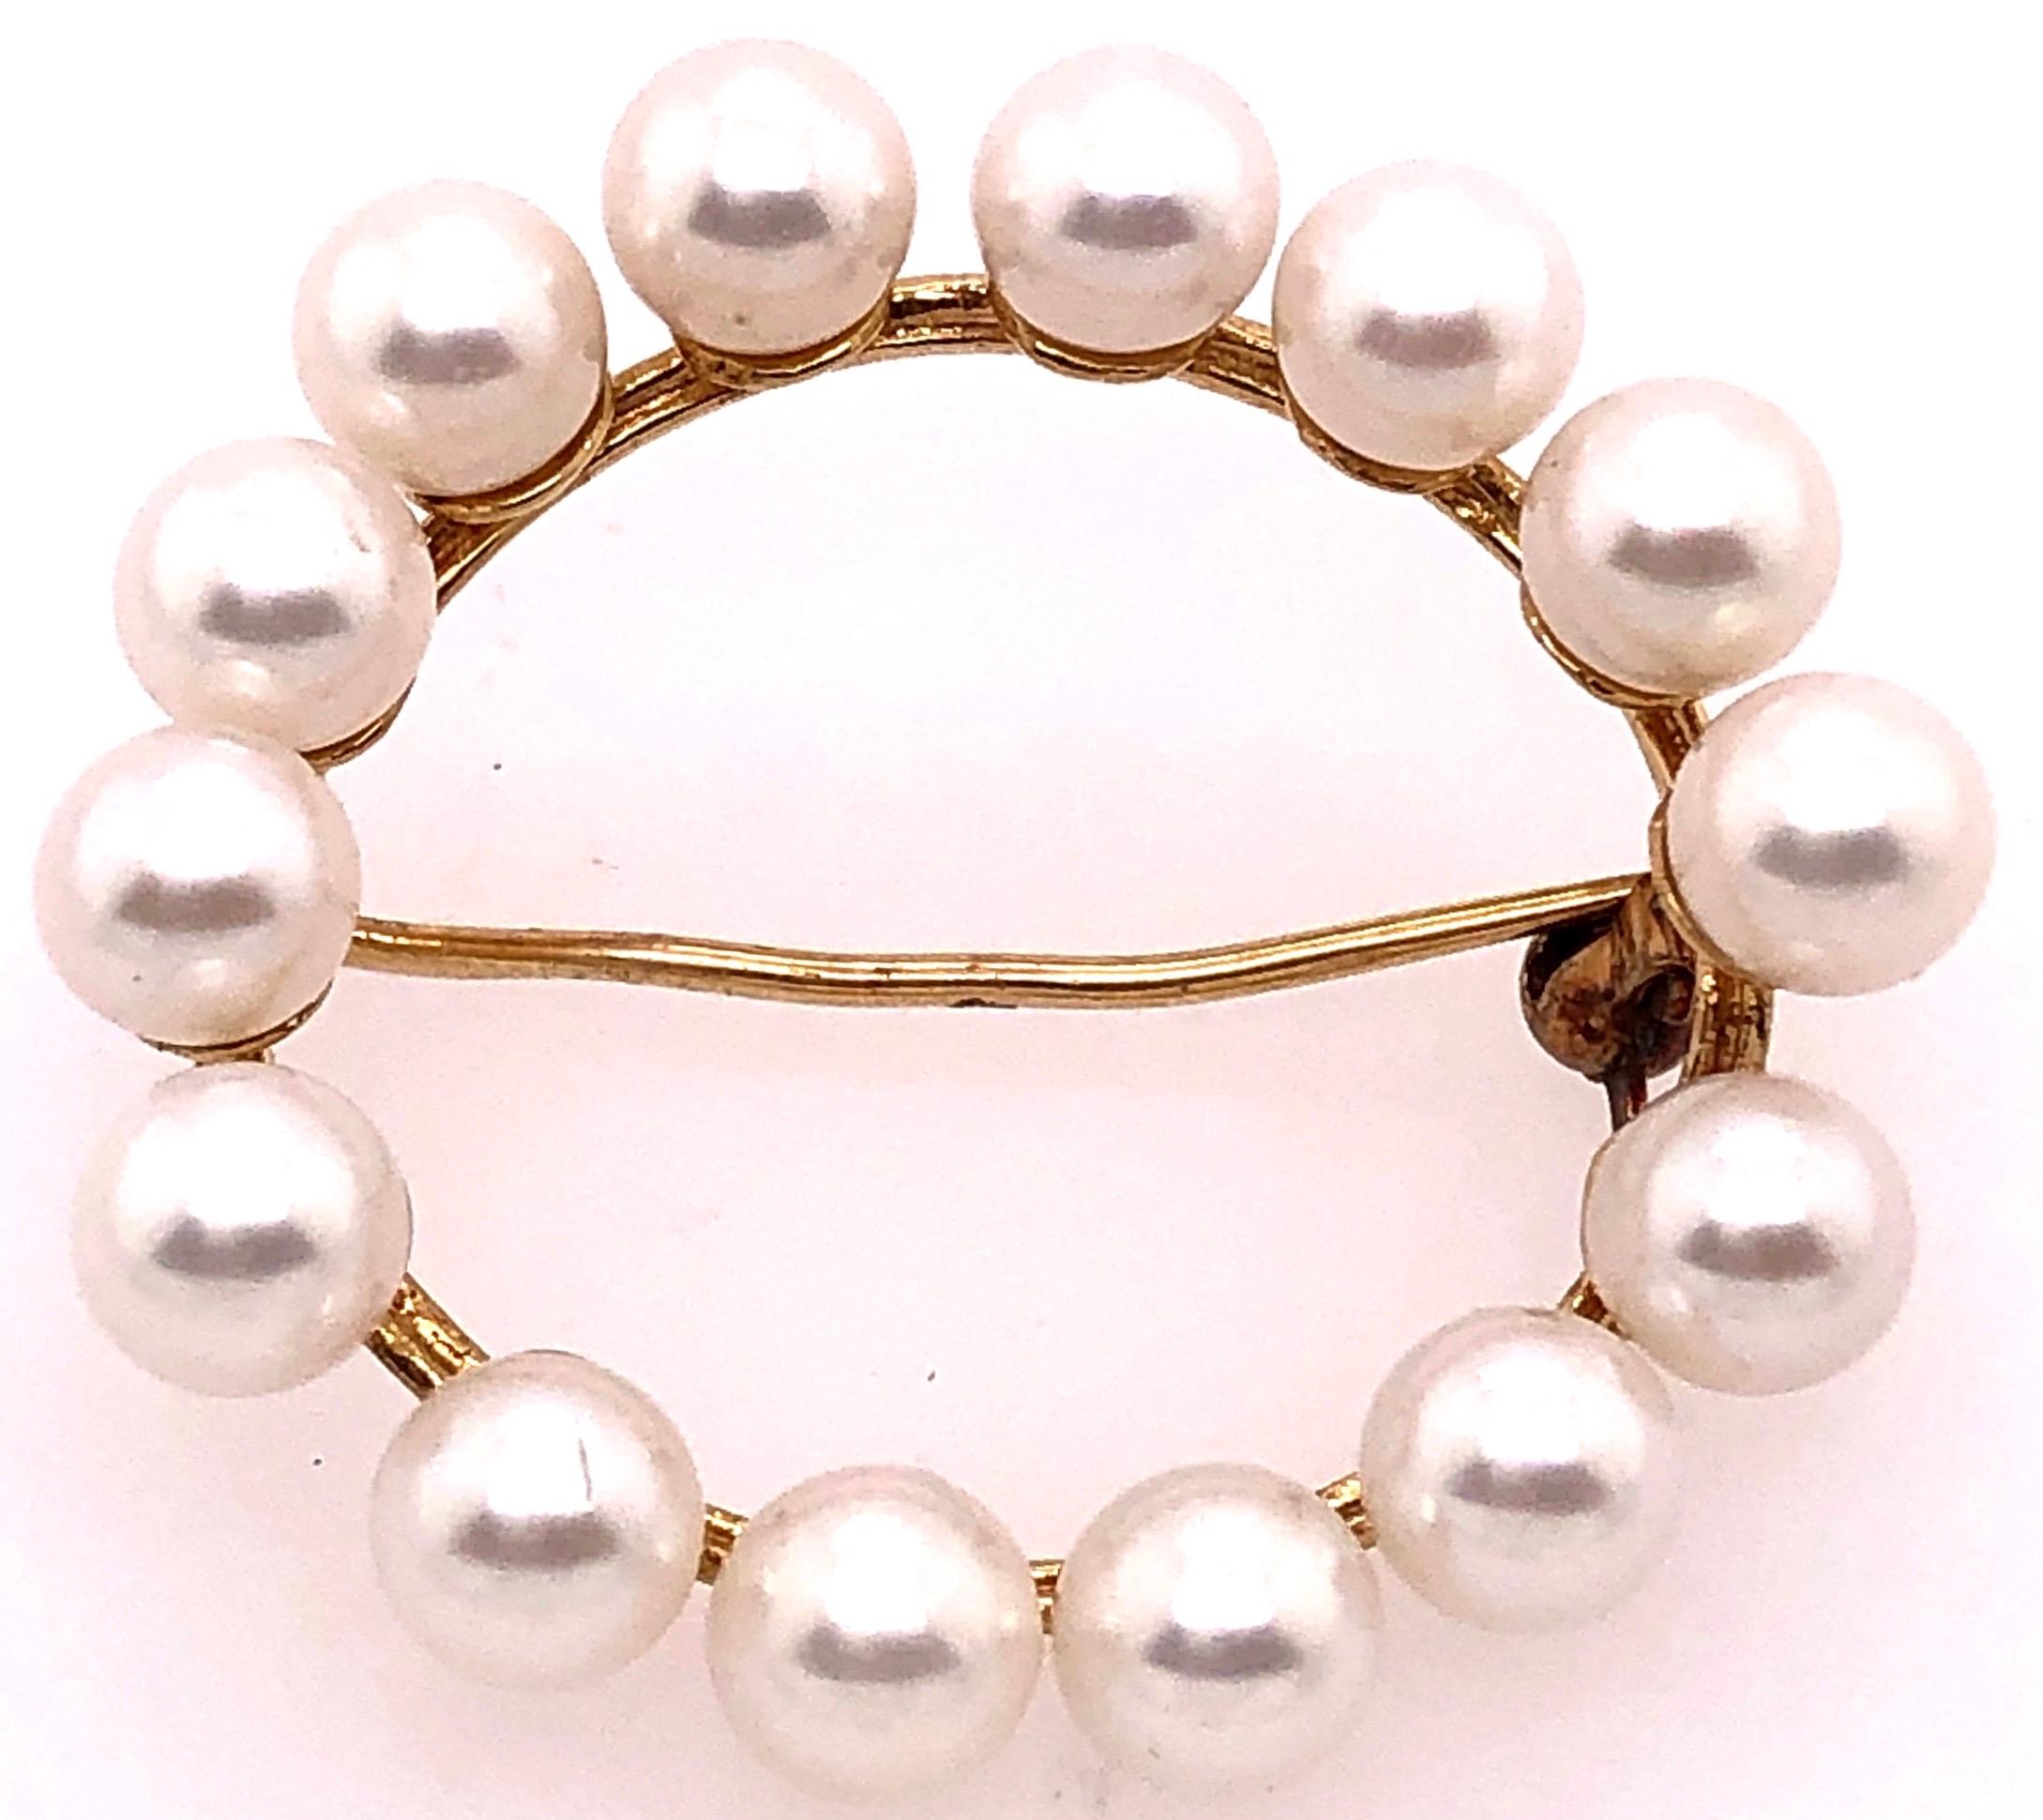 14 Karat Yellow Gold And Cultured Pearl Circle / Eternity Brooch
50 piece pearl
5.5-6 mm pearl size
2.71 grams total weight.
